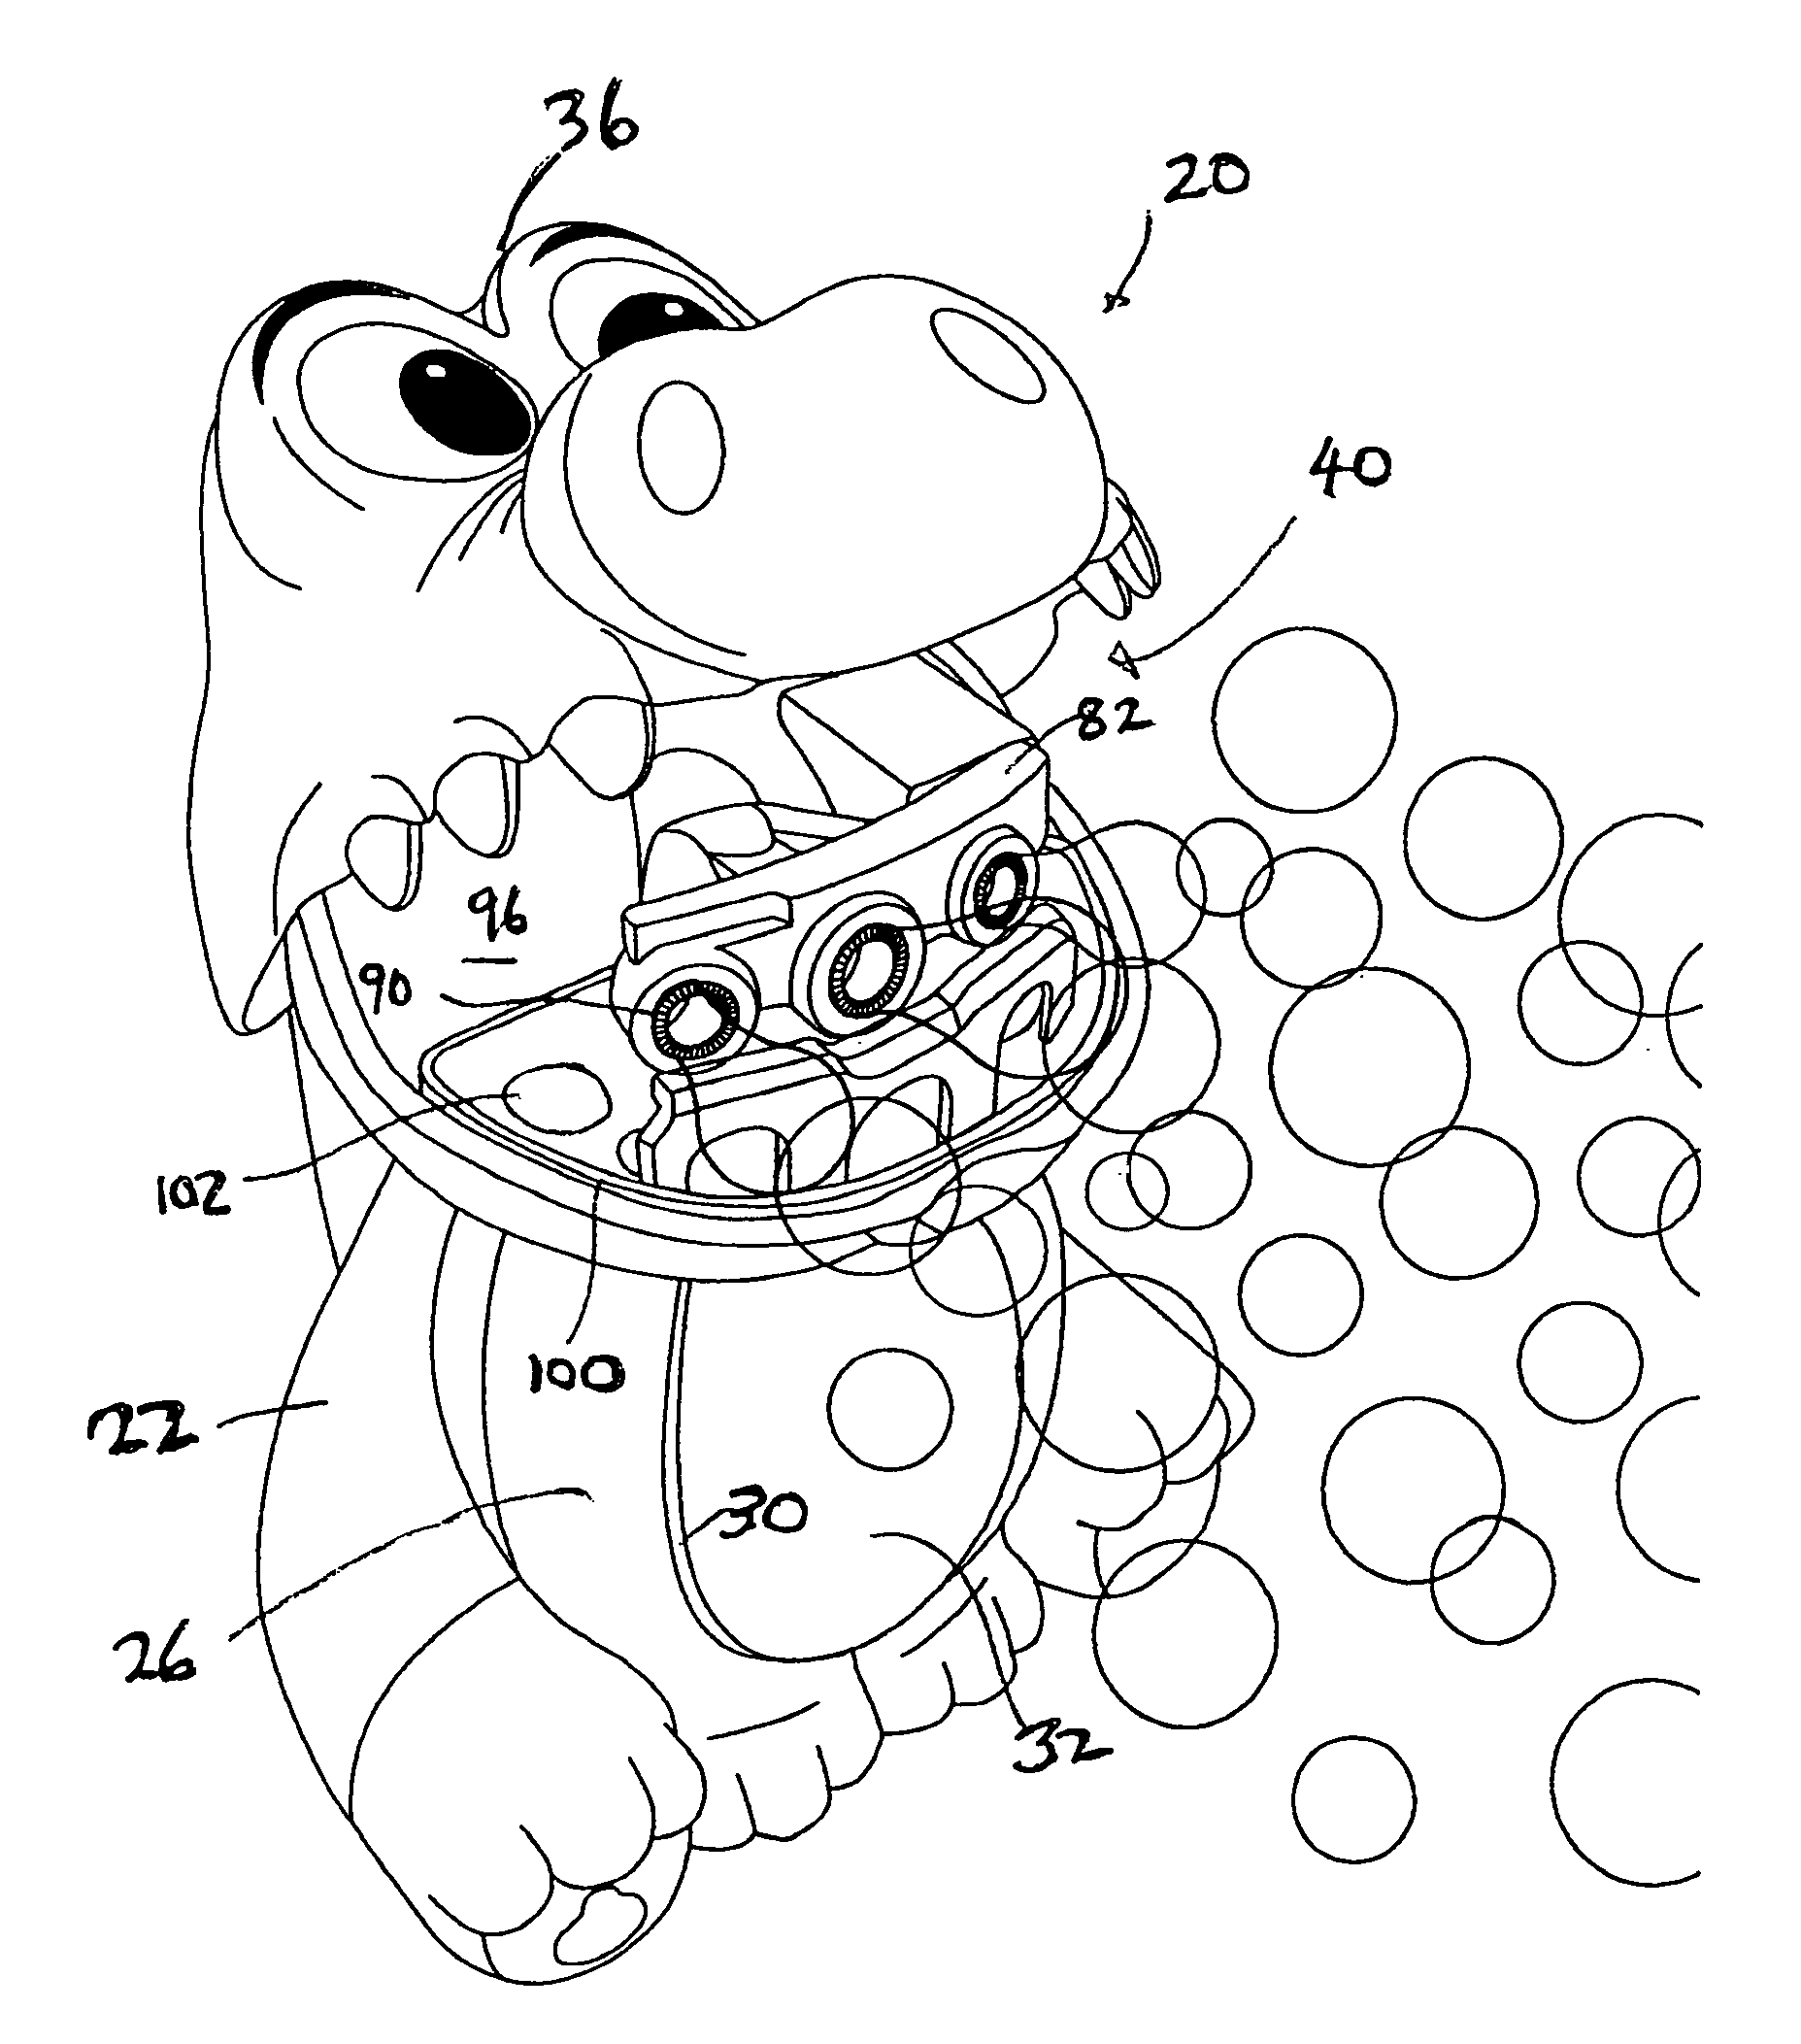 Bubble generating assembly